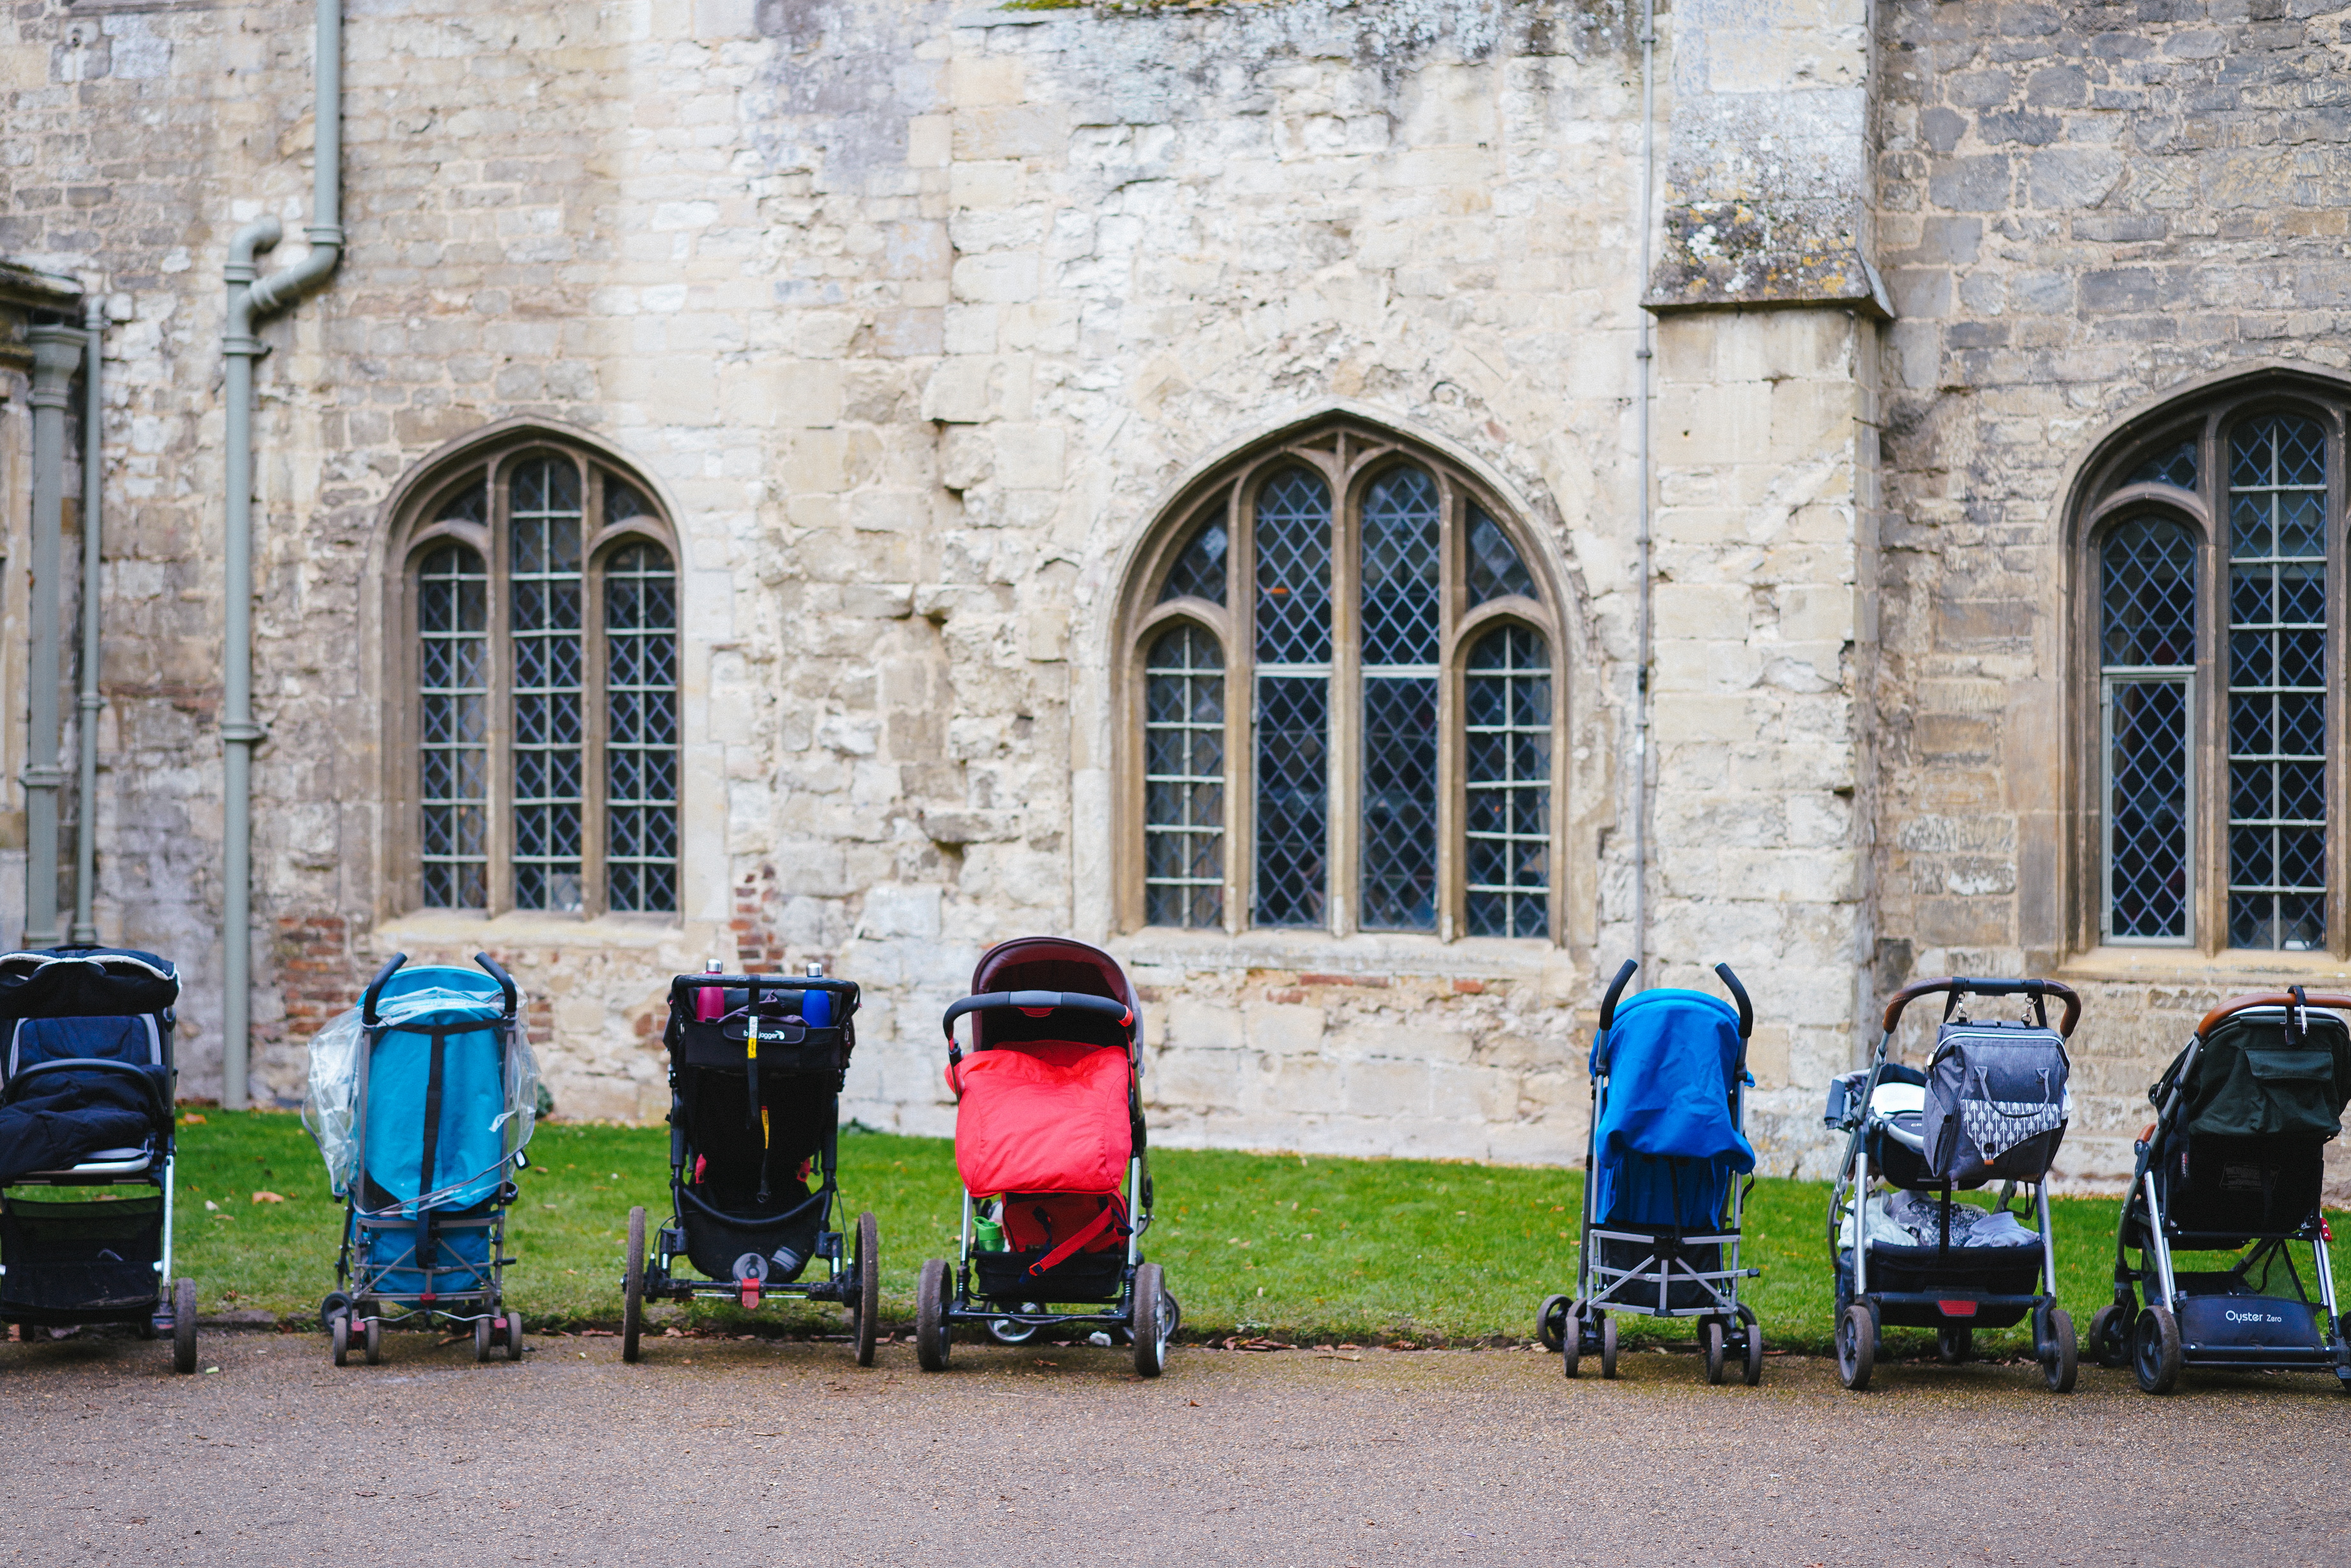 A line of infant's strollers, unattended, beside an empty building.